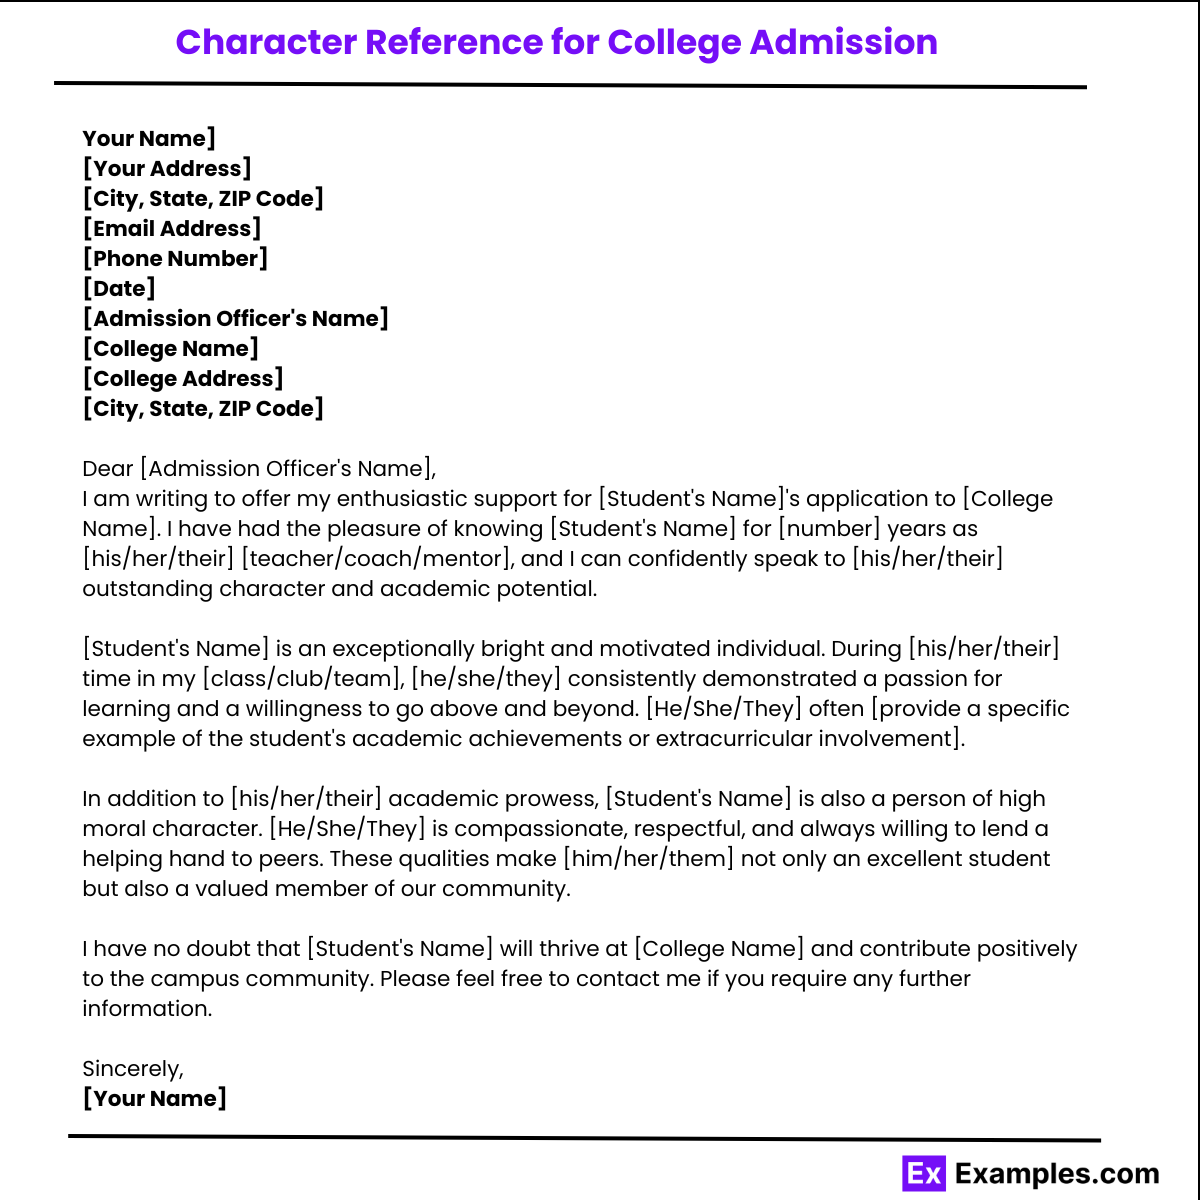 Character-Reference-for-College-Admission